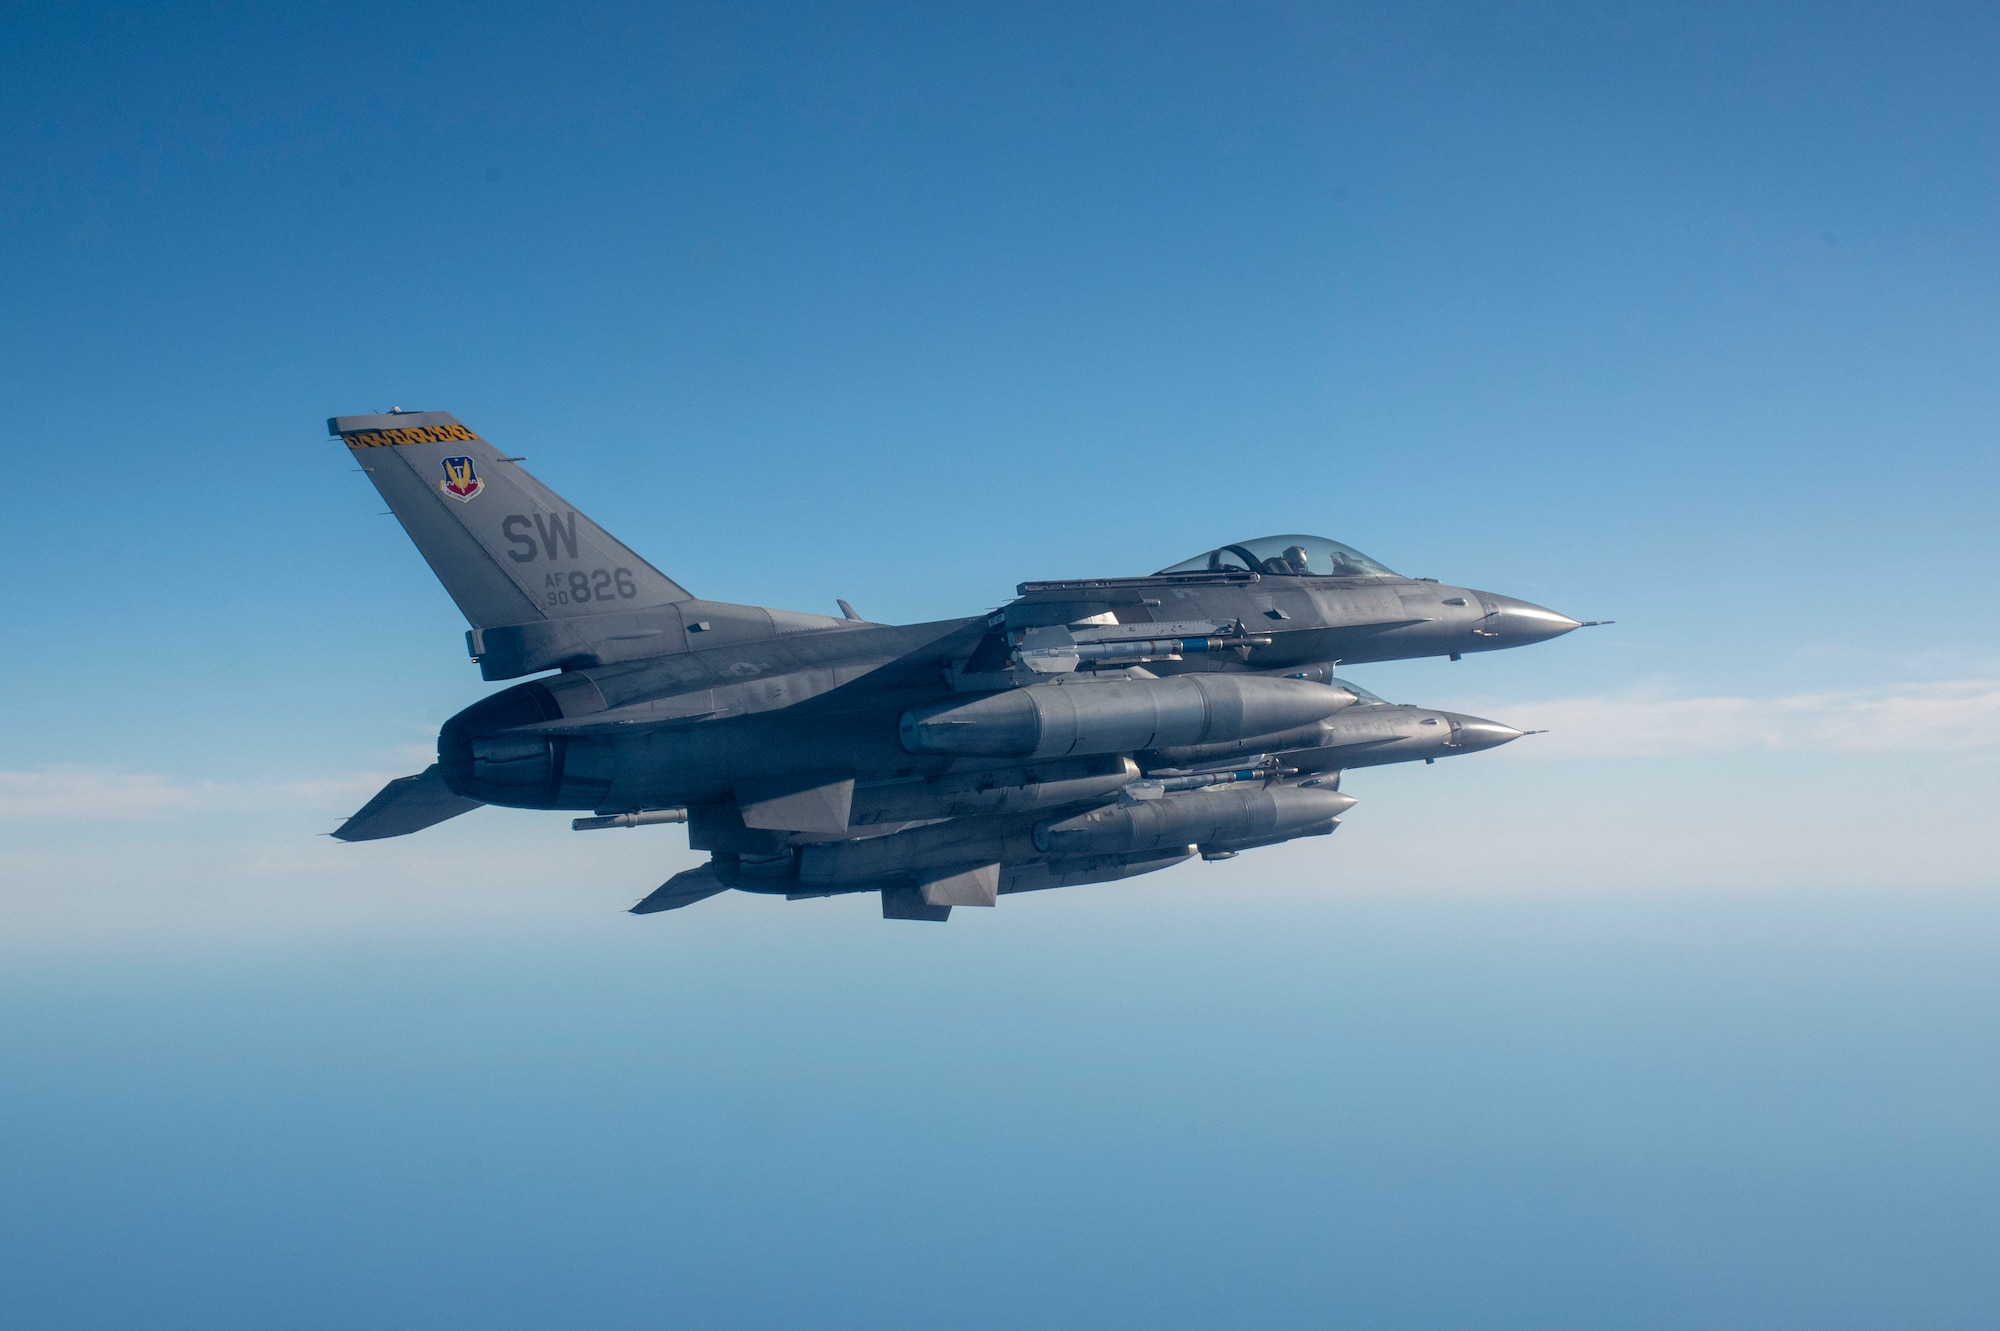 A pair of F-16C Fighting Falcons assigned to the 79th Fighter Squadron participate in the 53rd Weapons Evaluation Group’s Weapons System Evaluation Program East 22.02, hosted at Tyndall Air Force Base, Fla., Nov. 16, 2021. WSEP tests and validates the performance of crews, pilots, and their technology to enhance readiness for real-world operations. (U.S. Air Force photo by 1st Lt Lindsey Heflin)